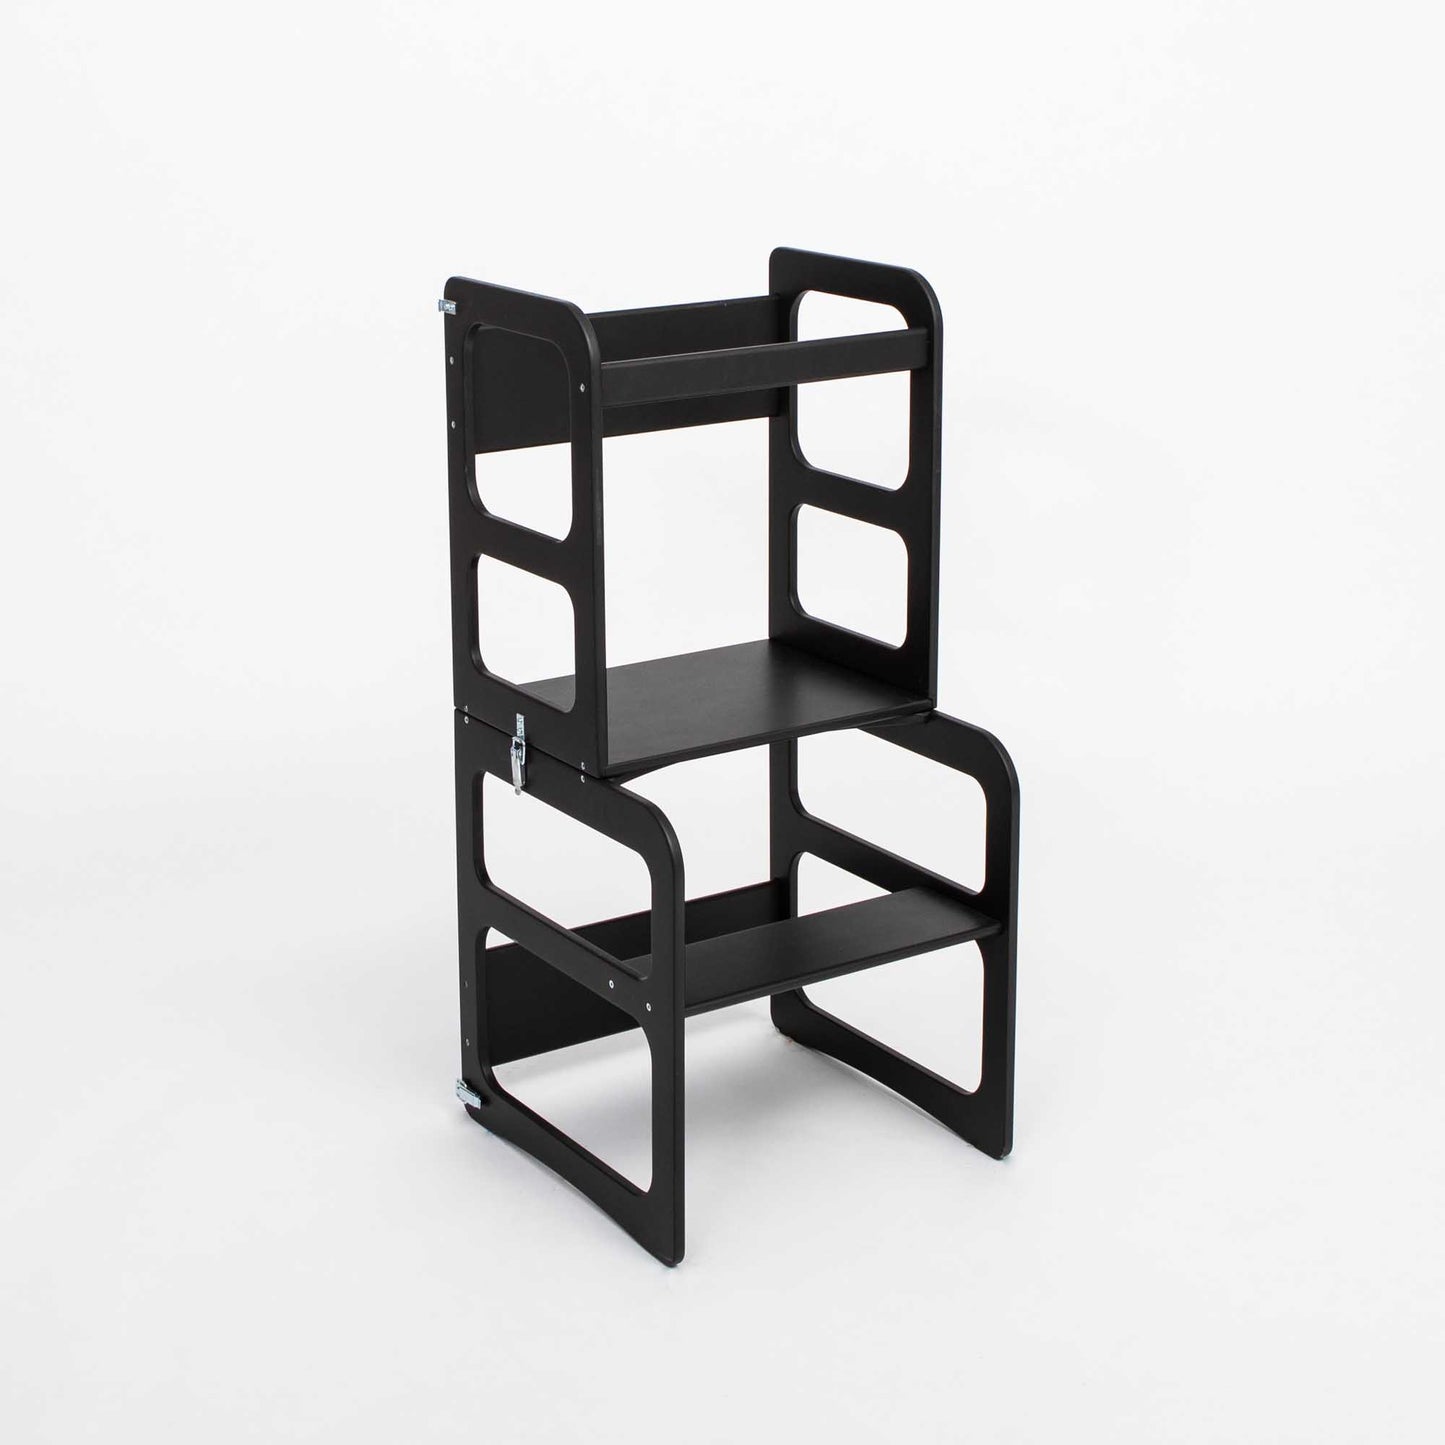 A black Montessori step stool, serving both as a 2-in-1 transformable kitchen tower - table and chair set or Montessori step stool.